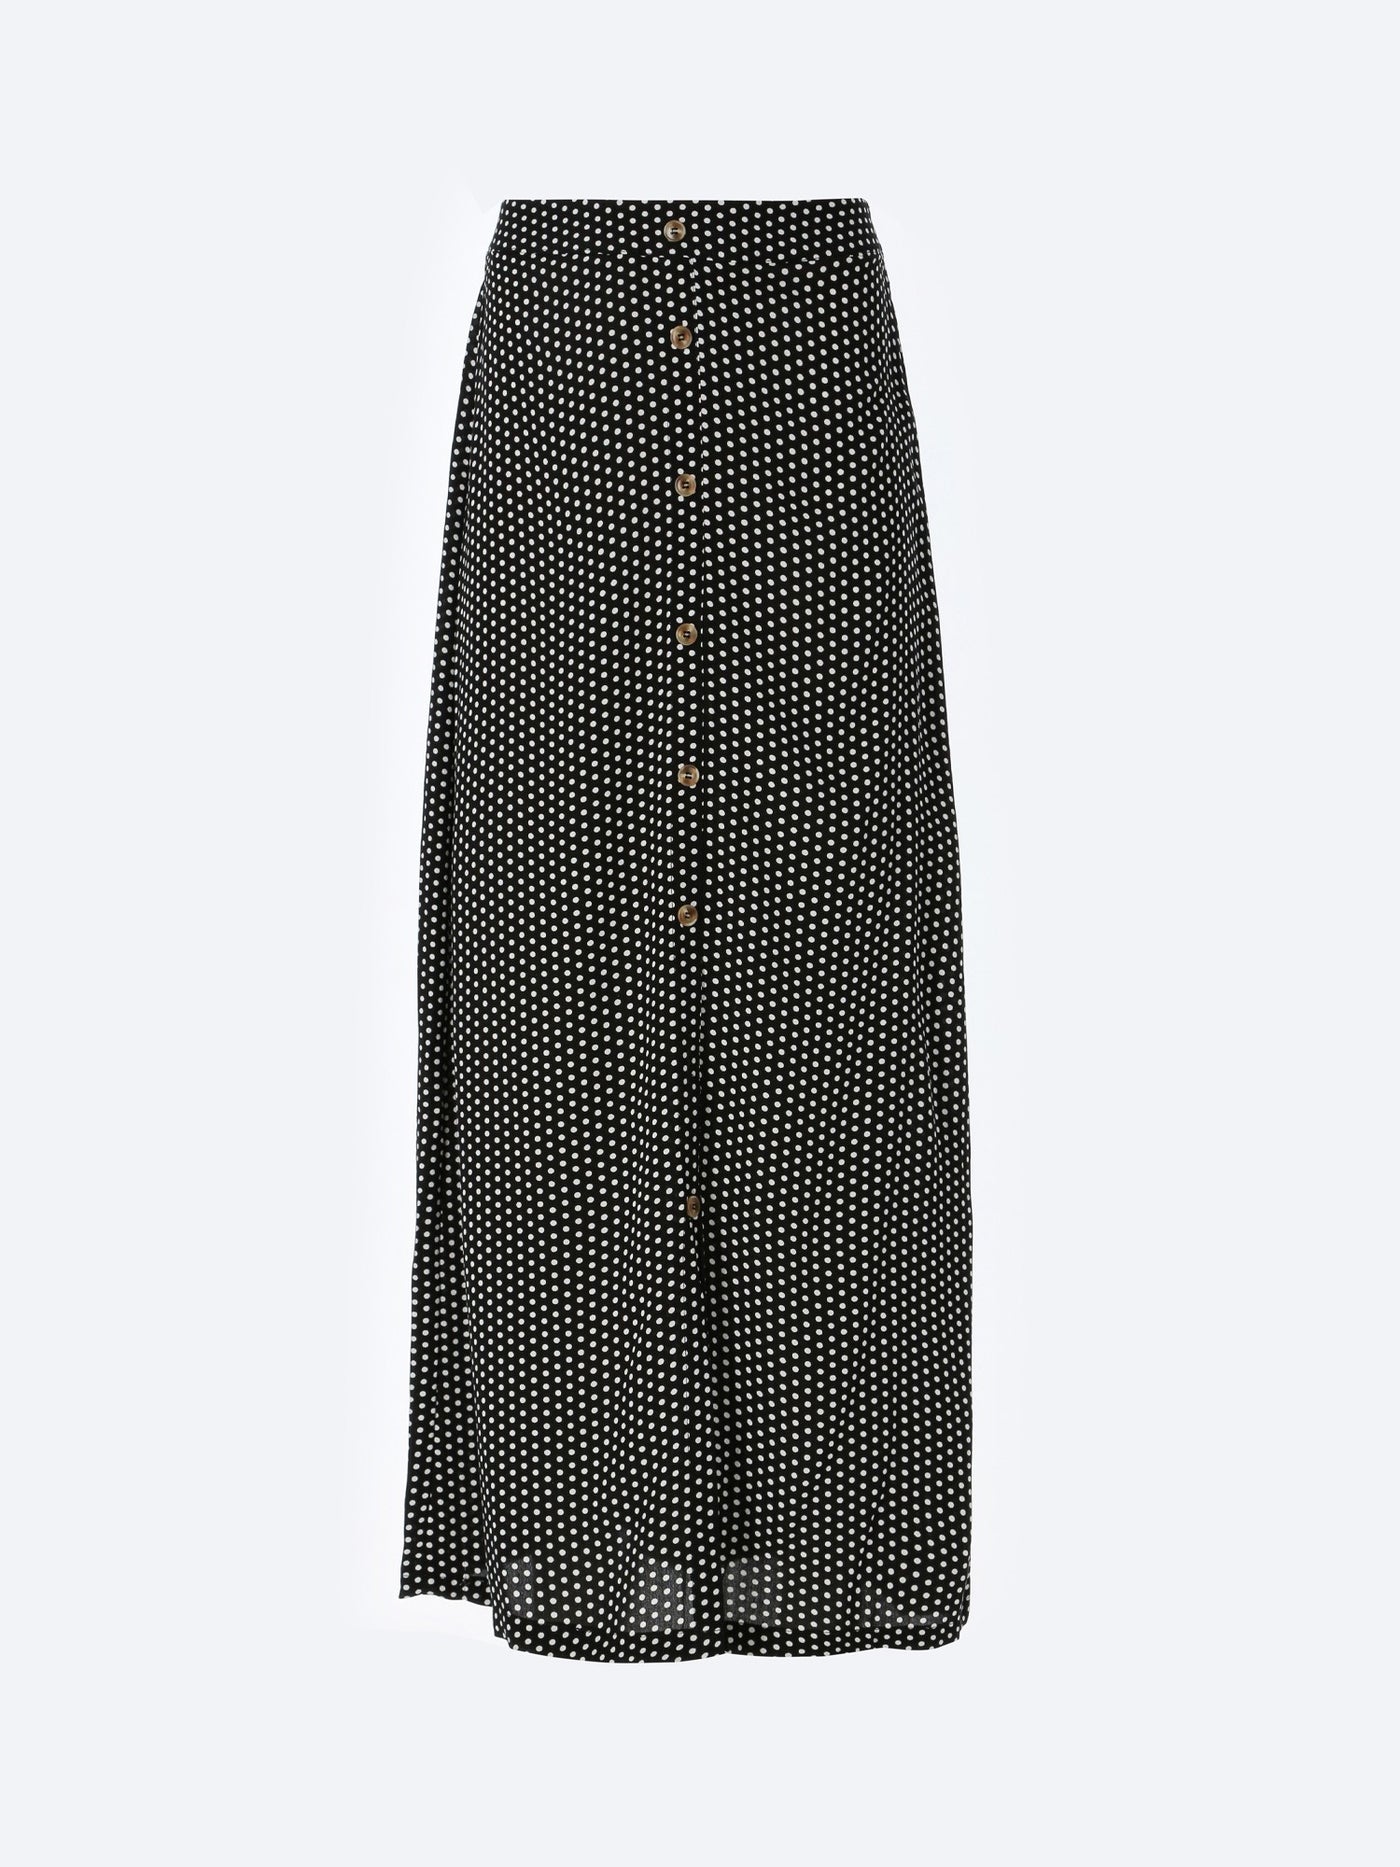 Skirt - Front Button - Printed